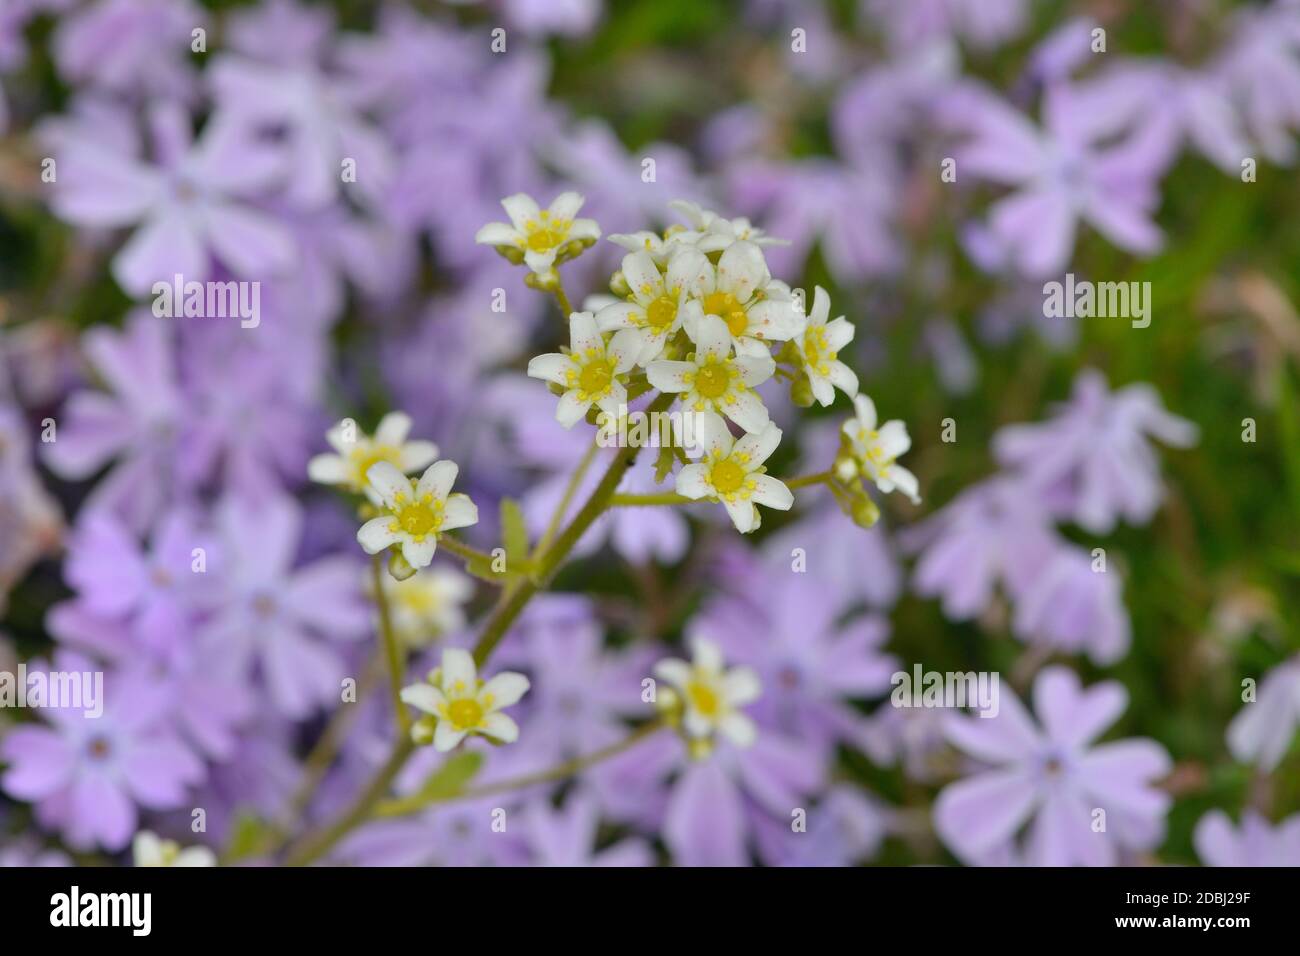 Blossom from saxifraga in a stone garden Stock Photo